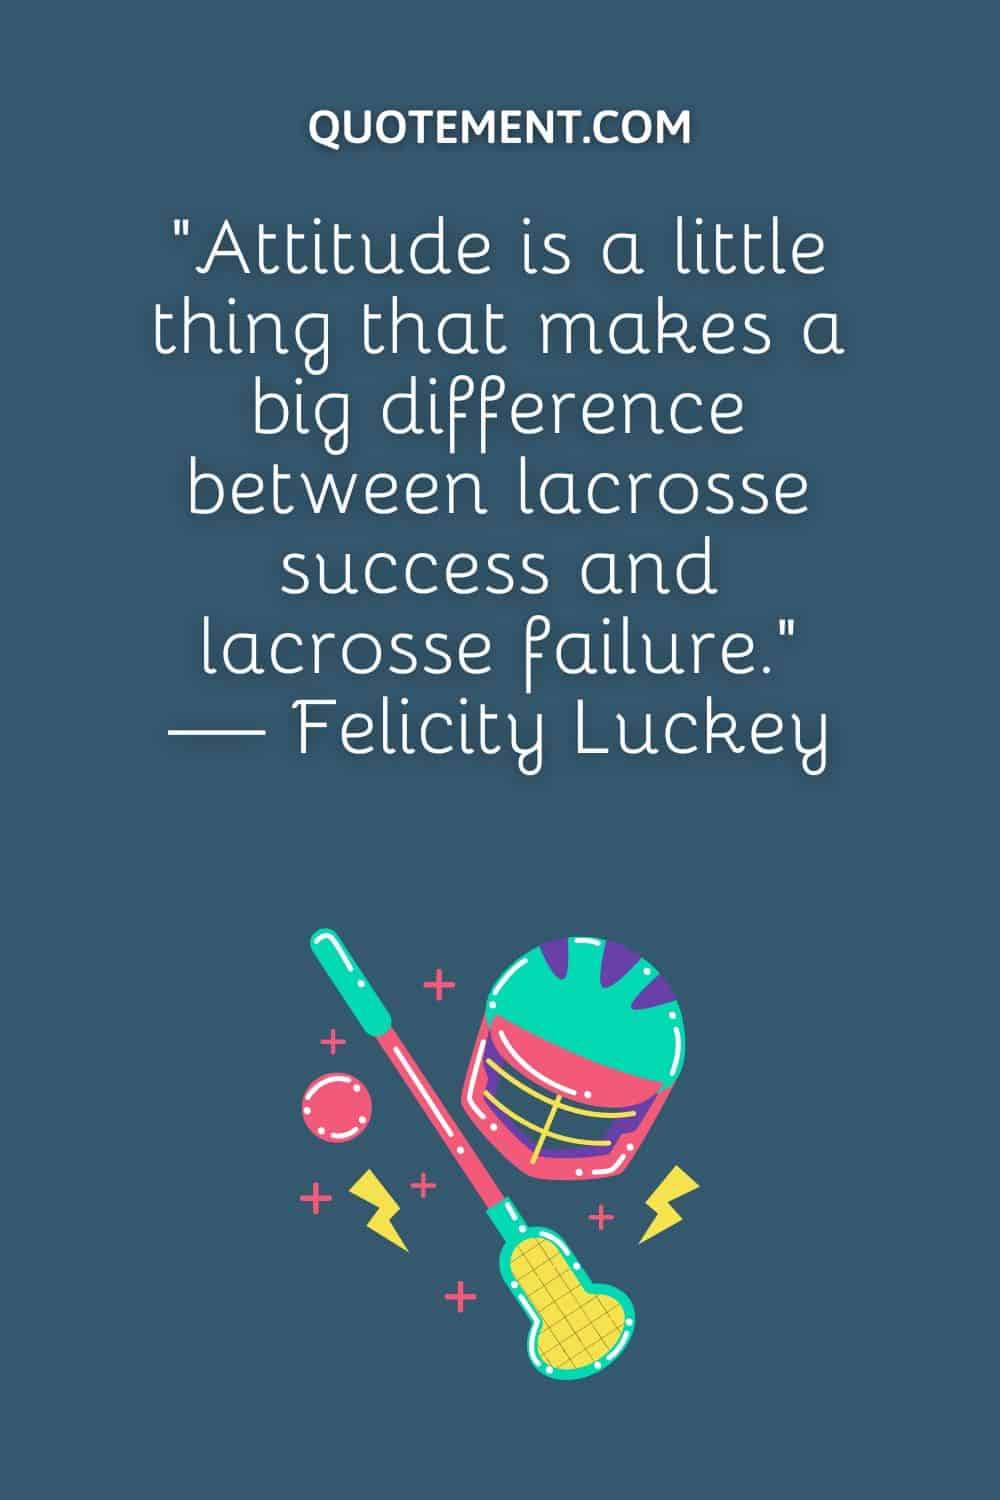 “Attitude is a little thing that makes a big difference between lacrosse success and lacrosse failure.” — Felicity Luckey